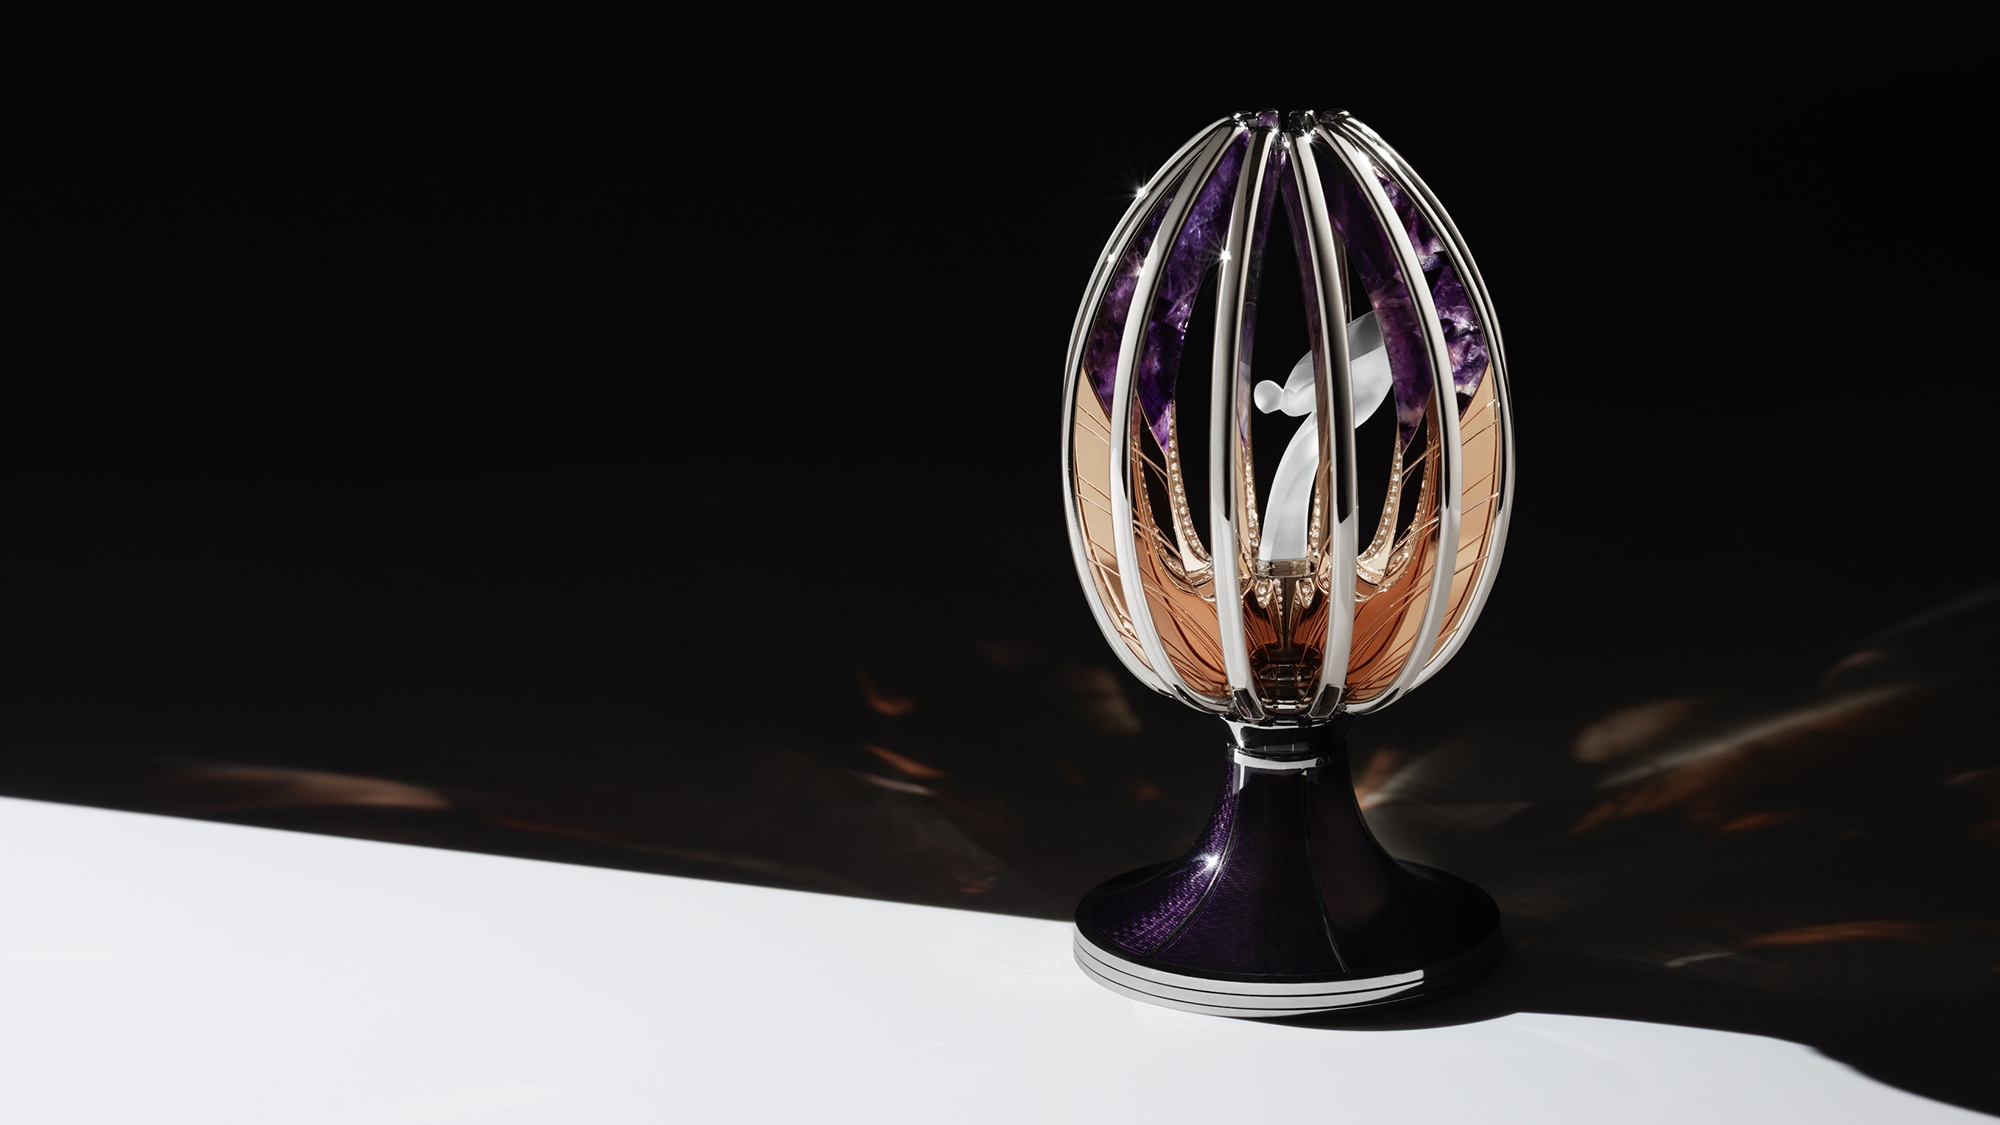 Rolls-Royce and Fabergé partner to build a special Spirit of Ecstasy egg